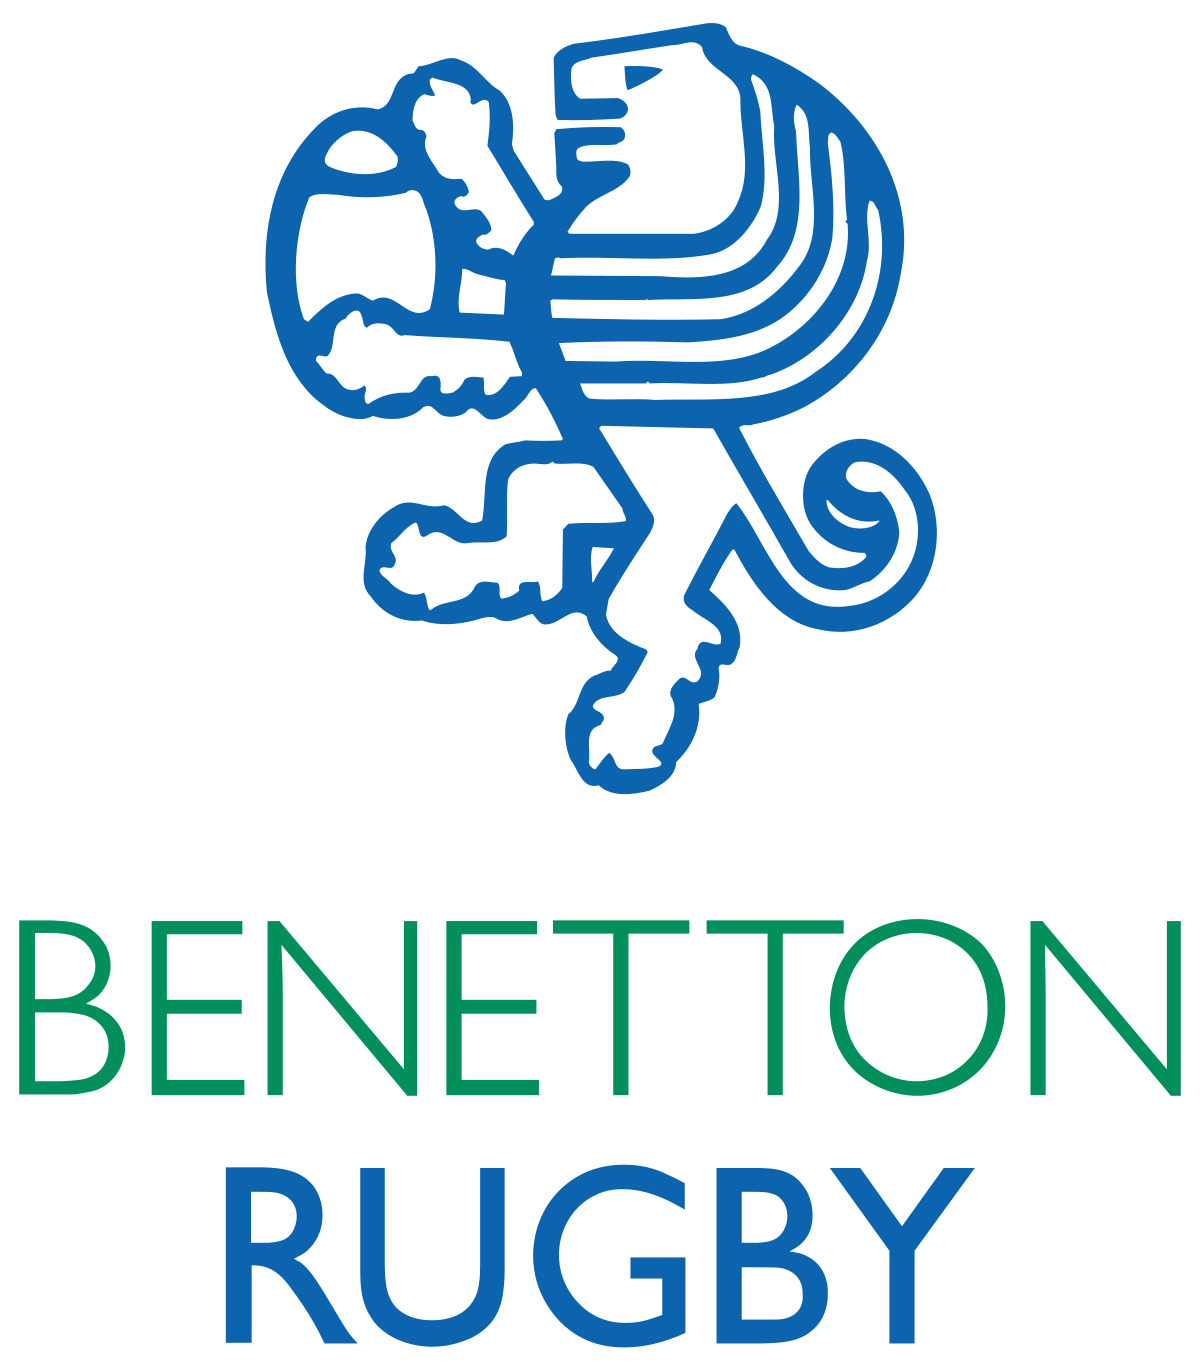 Benetton Rugby Logo icons